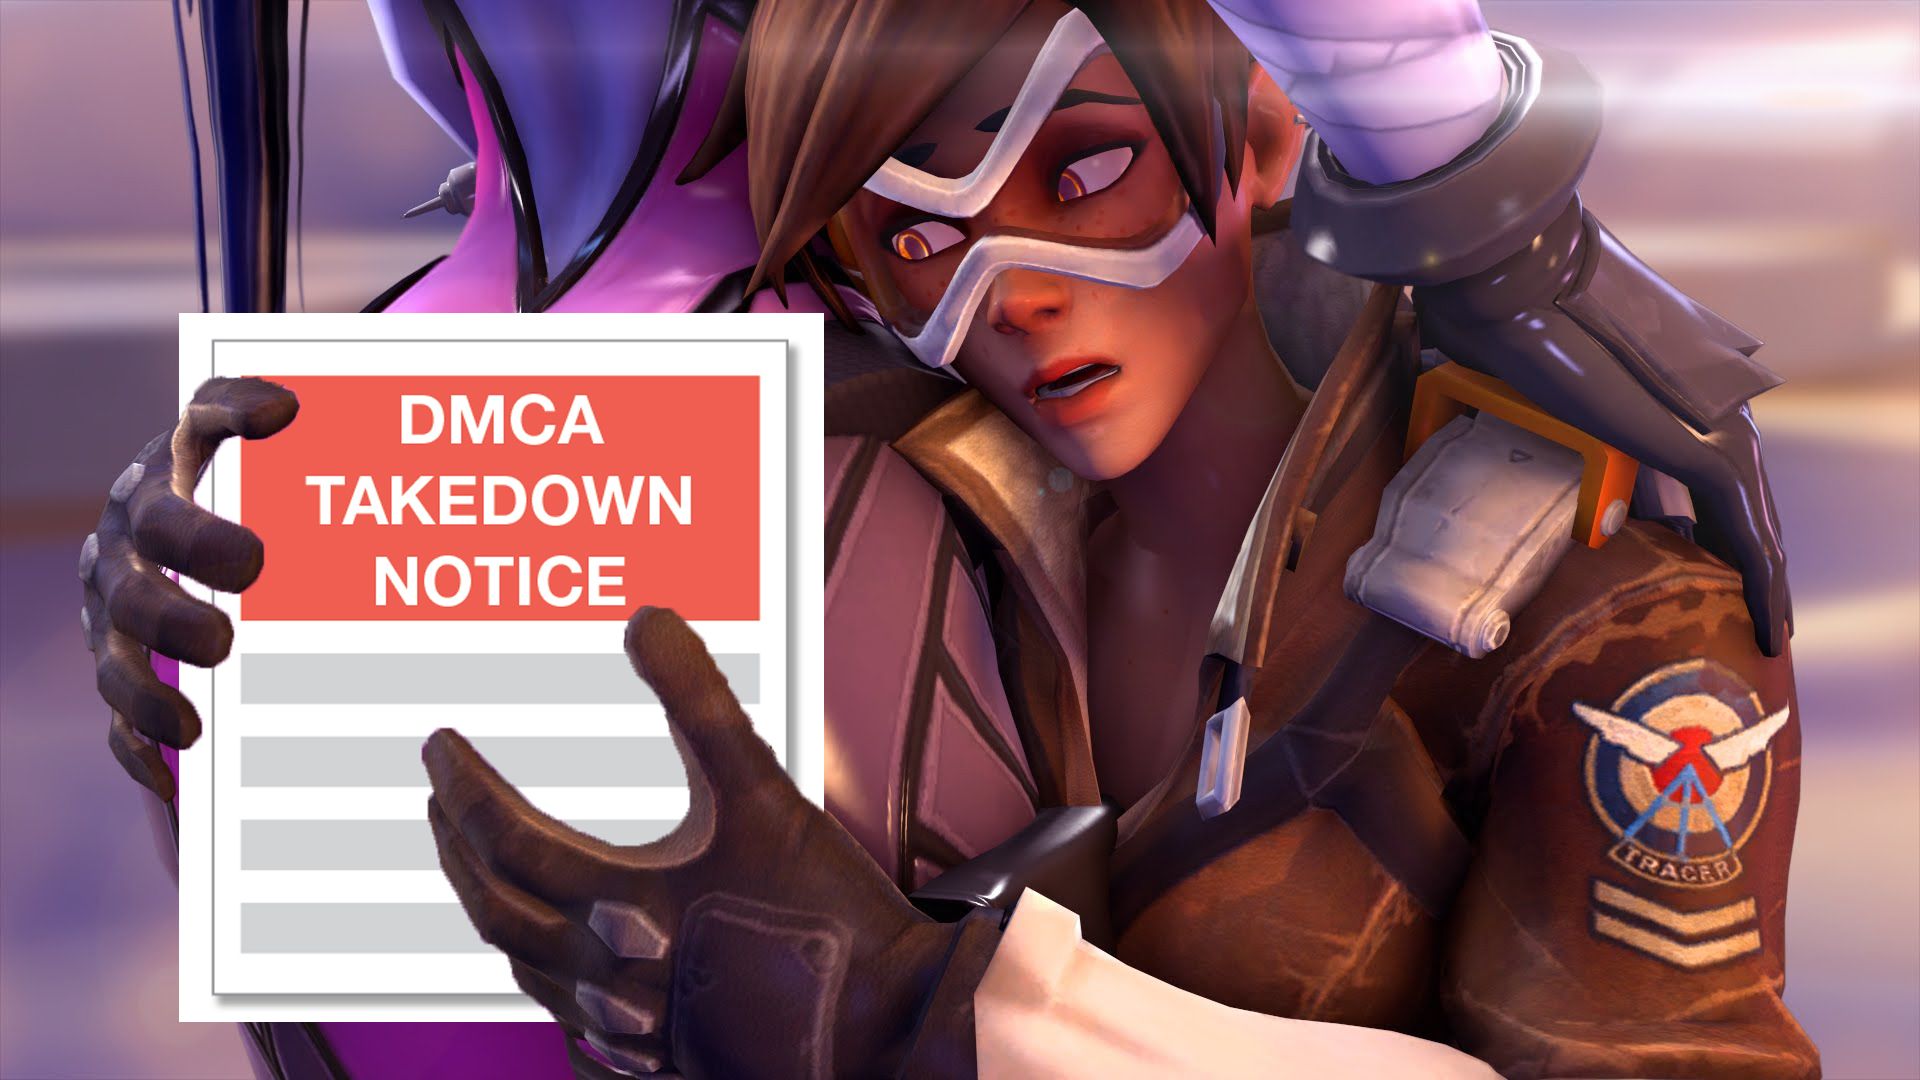 Overwatch Porn Fan Fiction - Activision Blizzard To DMCA Takedown All Overwatch Porn In Wake Of  Harassment Lawsuit